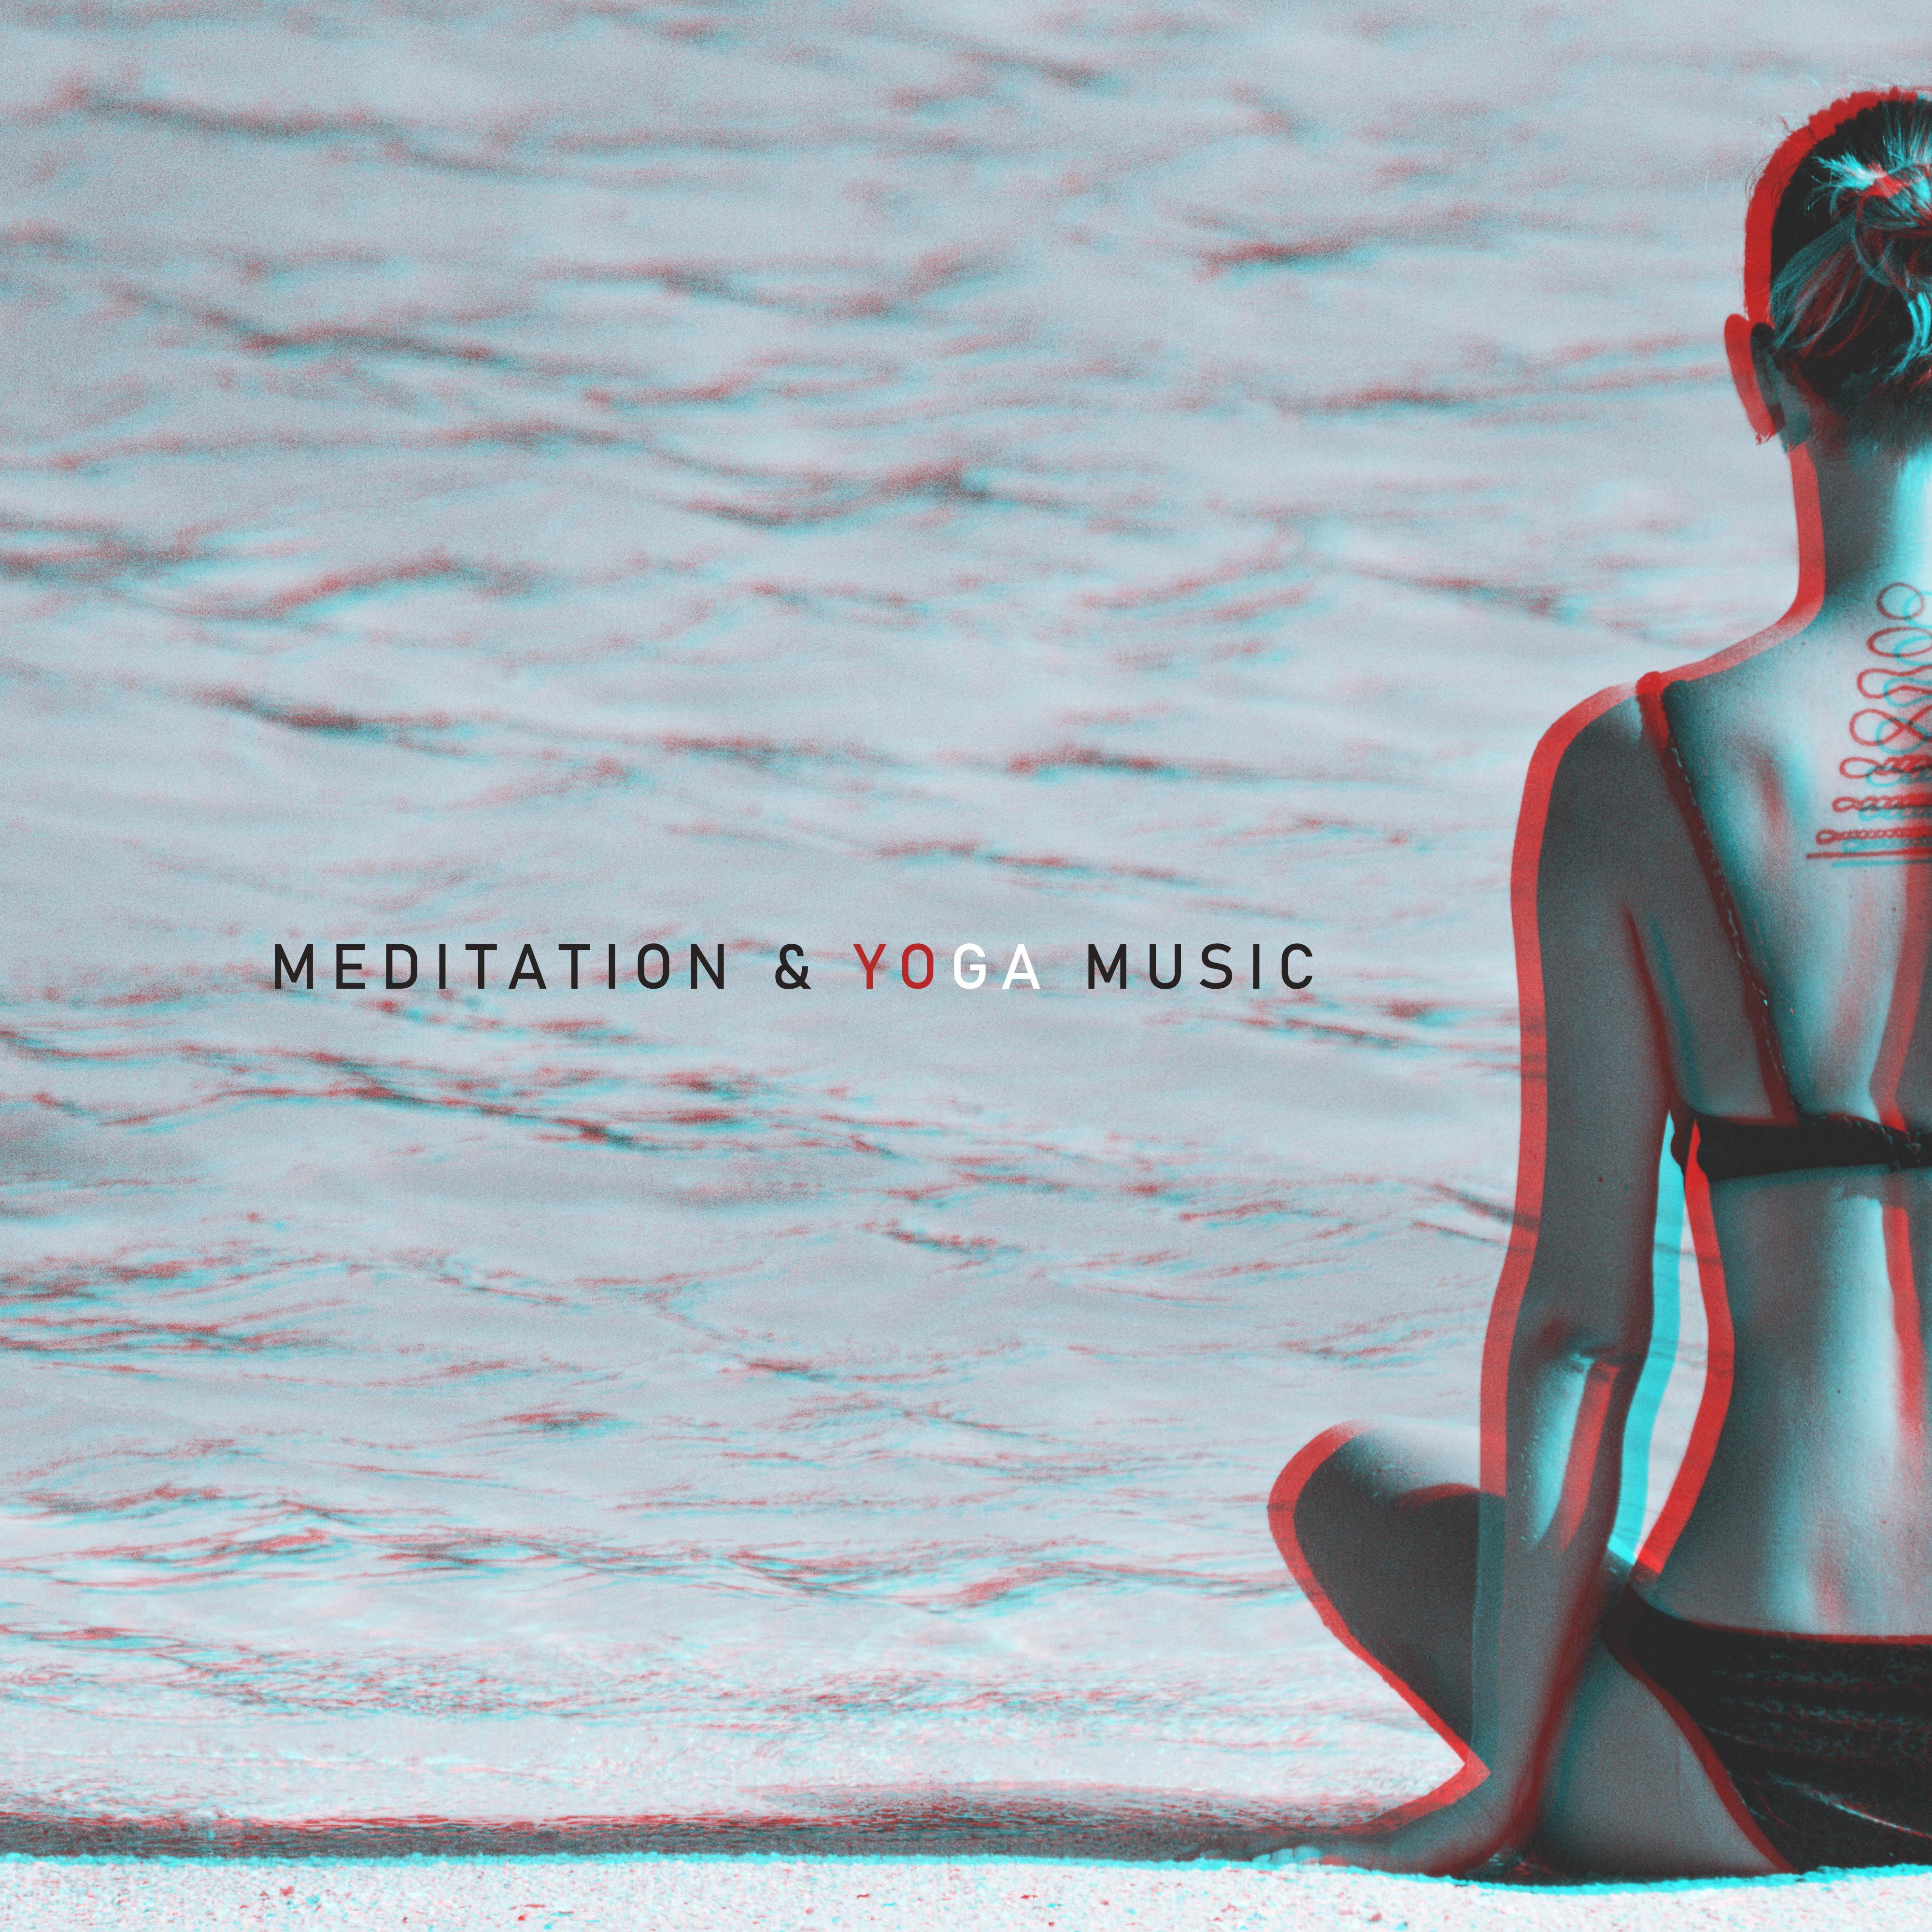 Meditation & Yoga Music: Full Concentration, Pure Relaxation, Meditation Music Zone